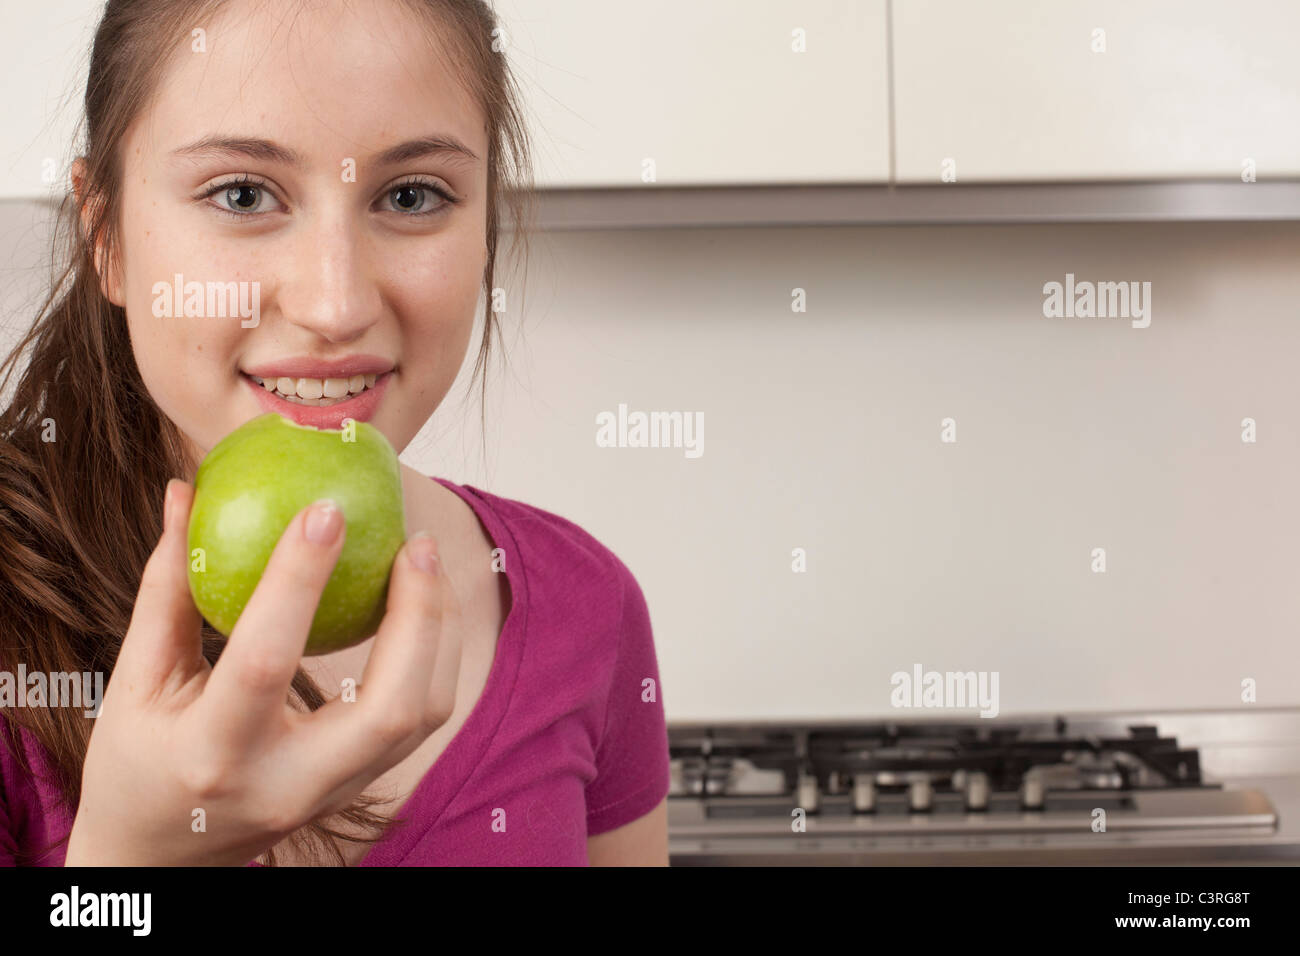 teenage girl eating an apple in kitchen Stock Photo